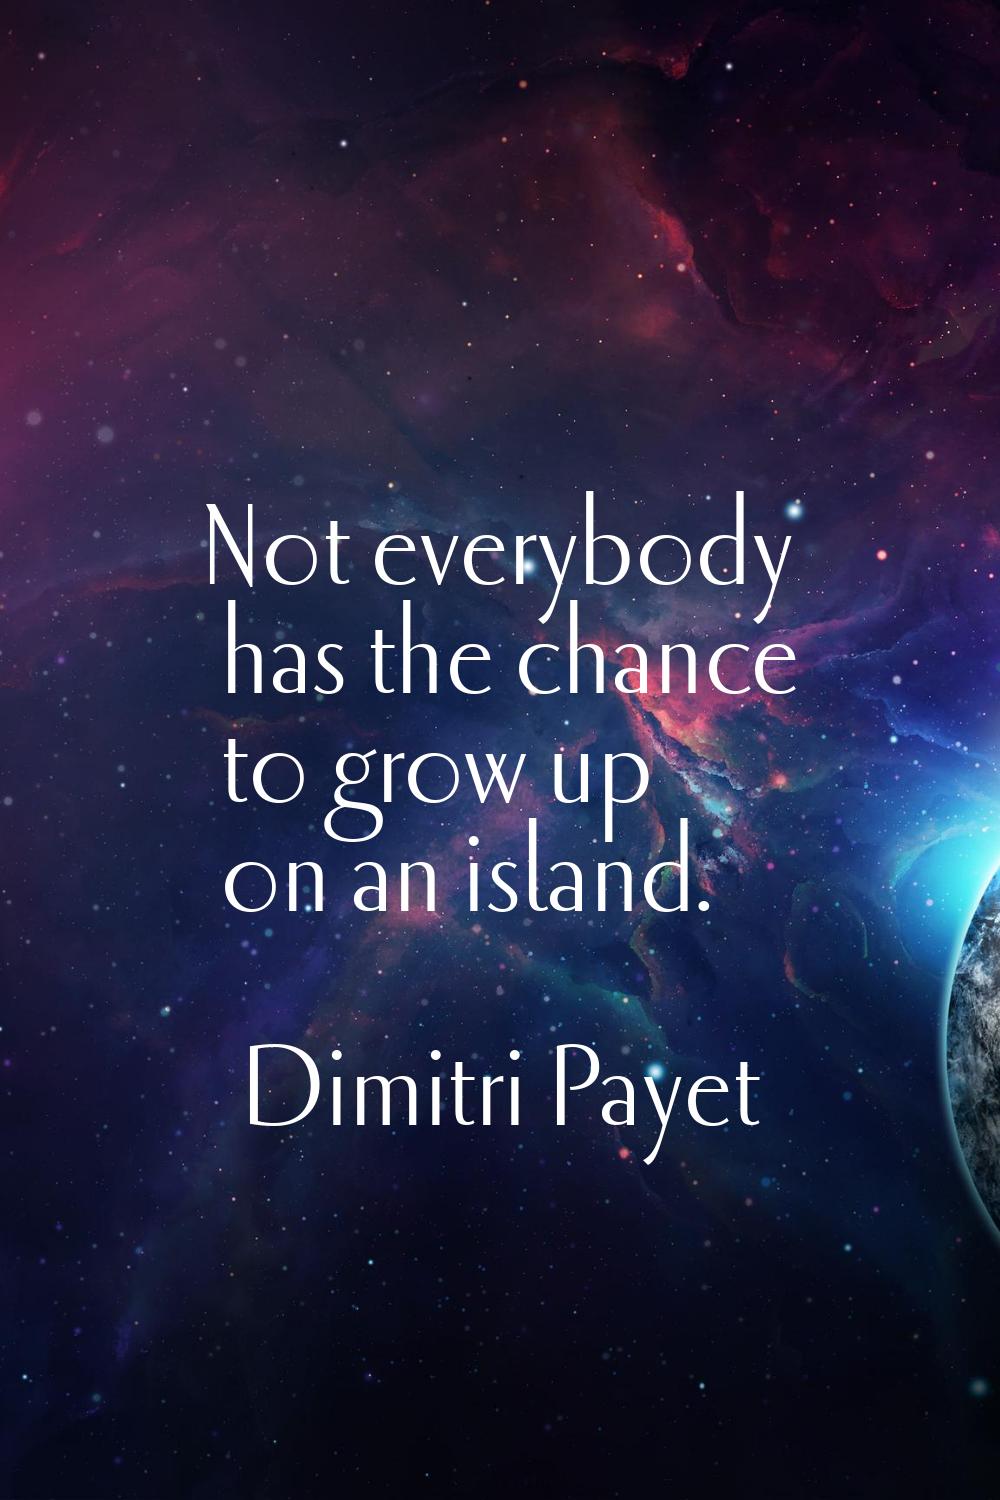 Not everybody has the chance to grow up on an island.